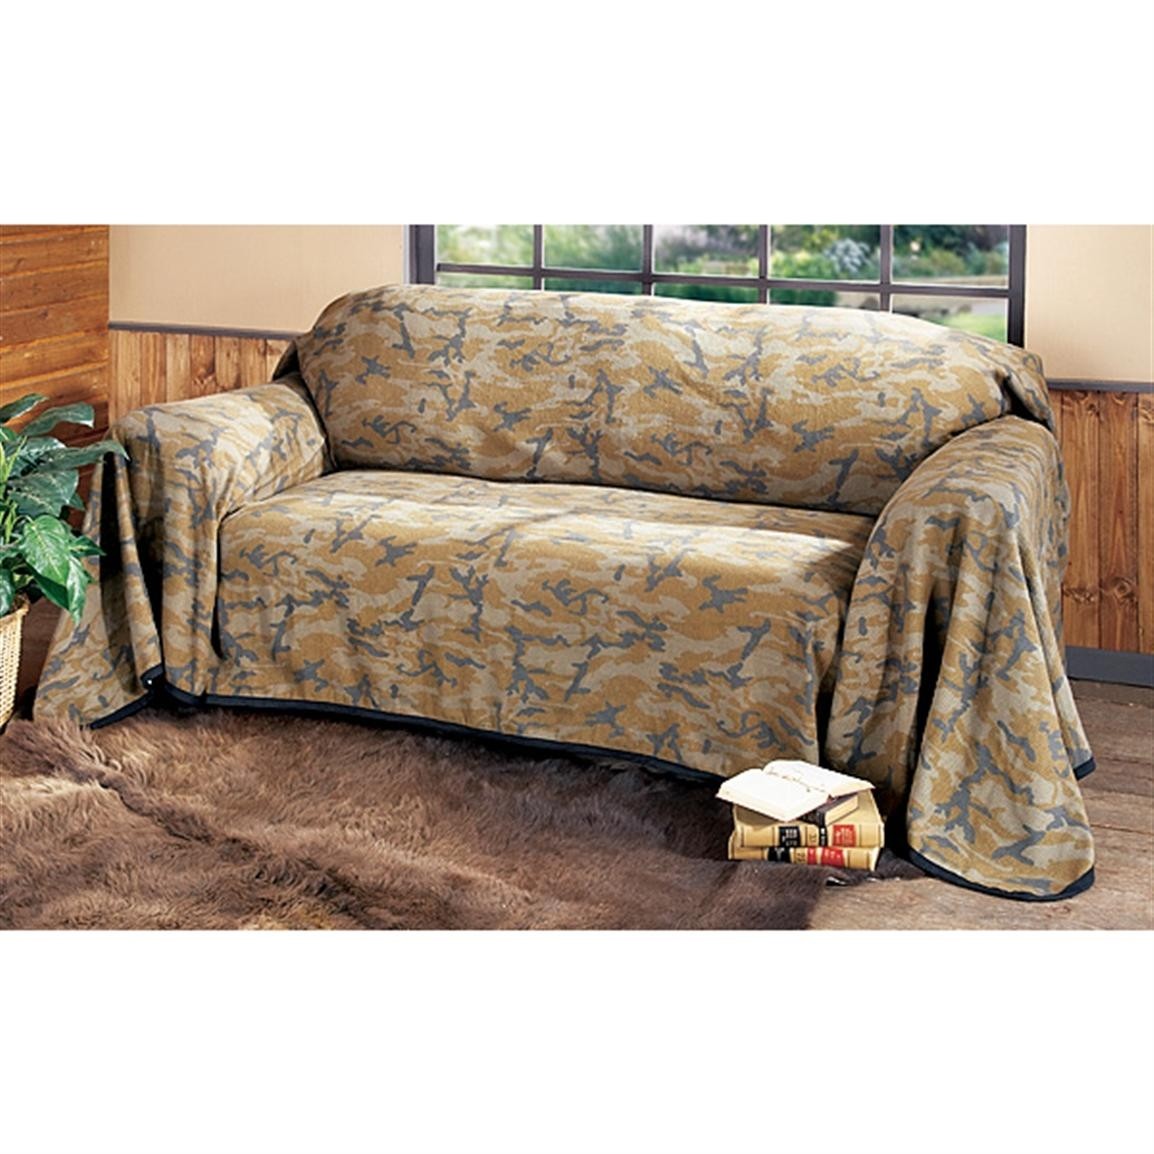 Camouflage furniture throw 106437 furniture covers at